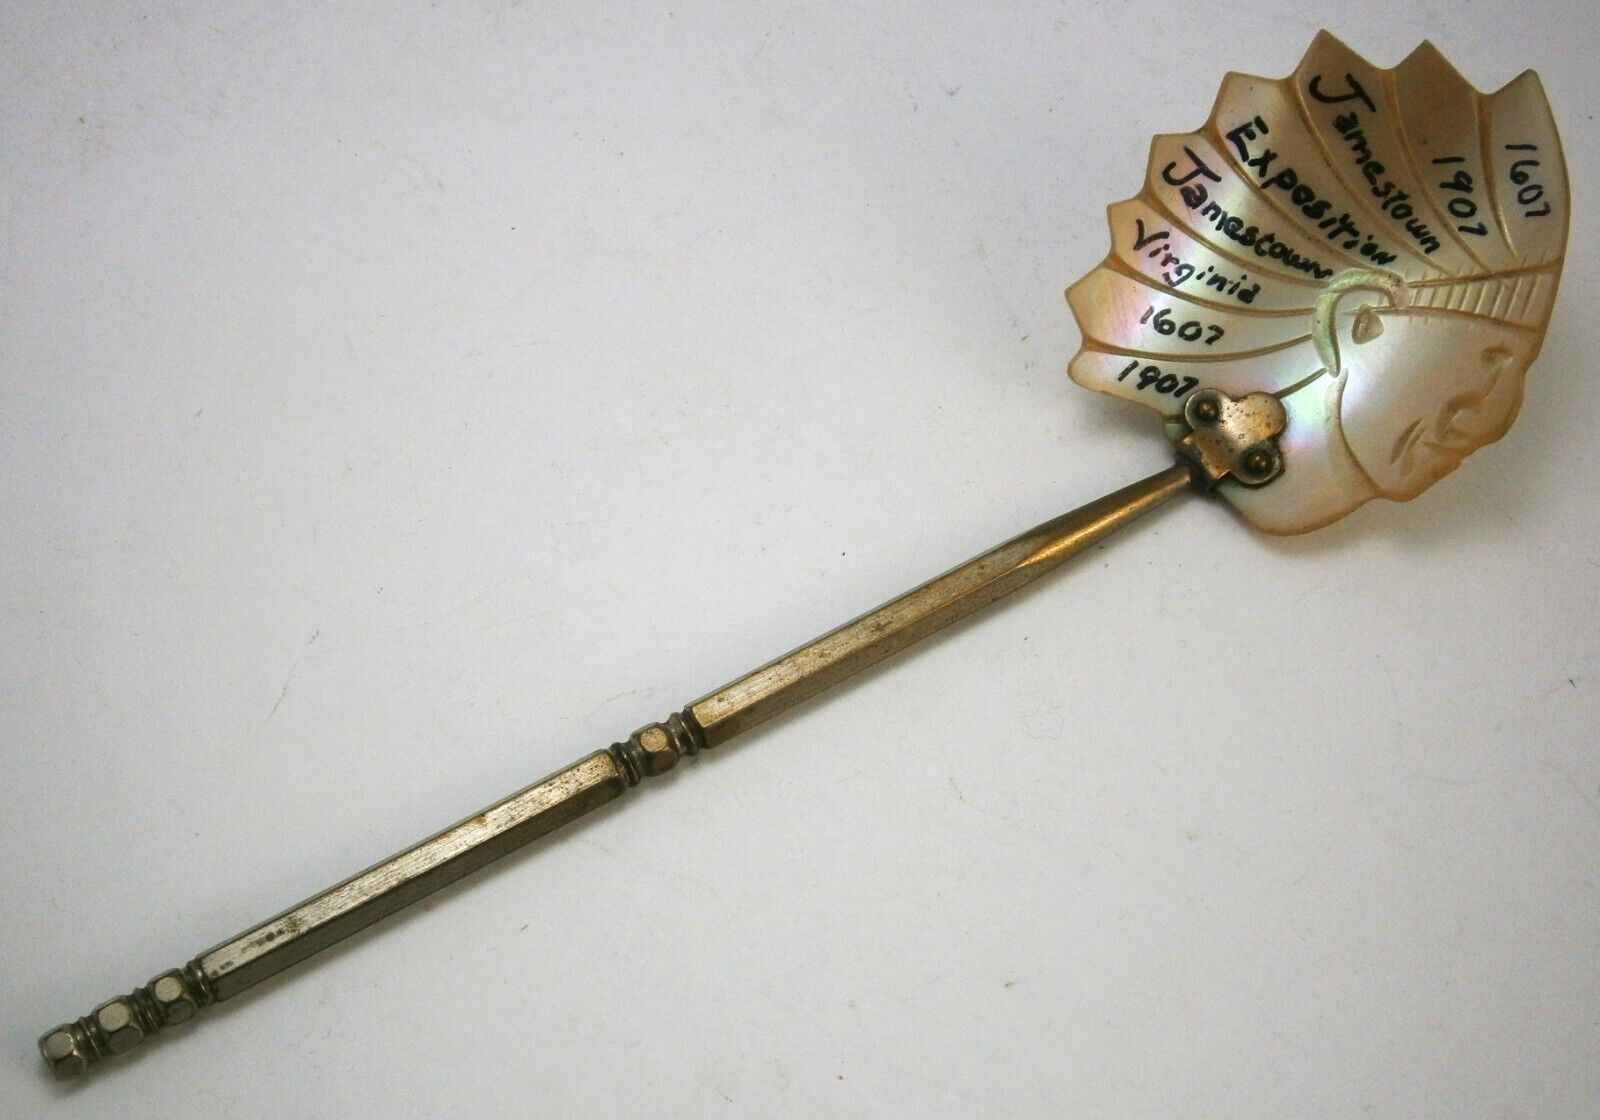 1907 Jamestown Exposition Souvenir Spoon w/ Shell Bowl in Shape of Indian Chief